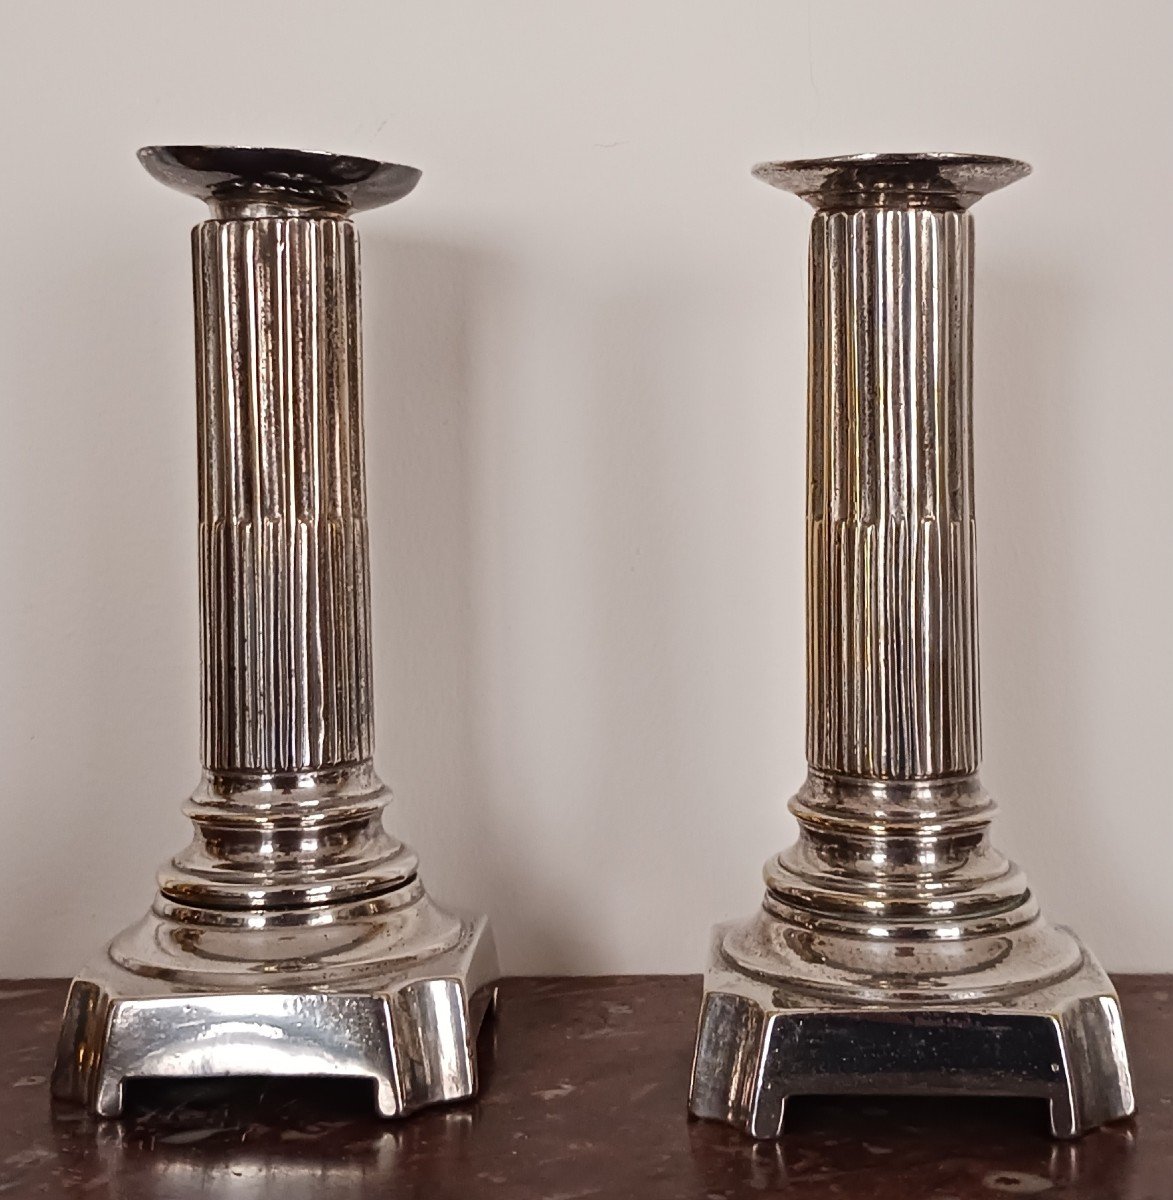 France, Last Third Of The 18th Century - Pair Of Silver-plated Bronze Candlesticks Or Torches - Louis XVI Period-photo-2